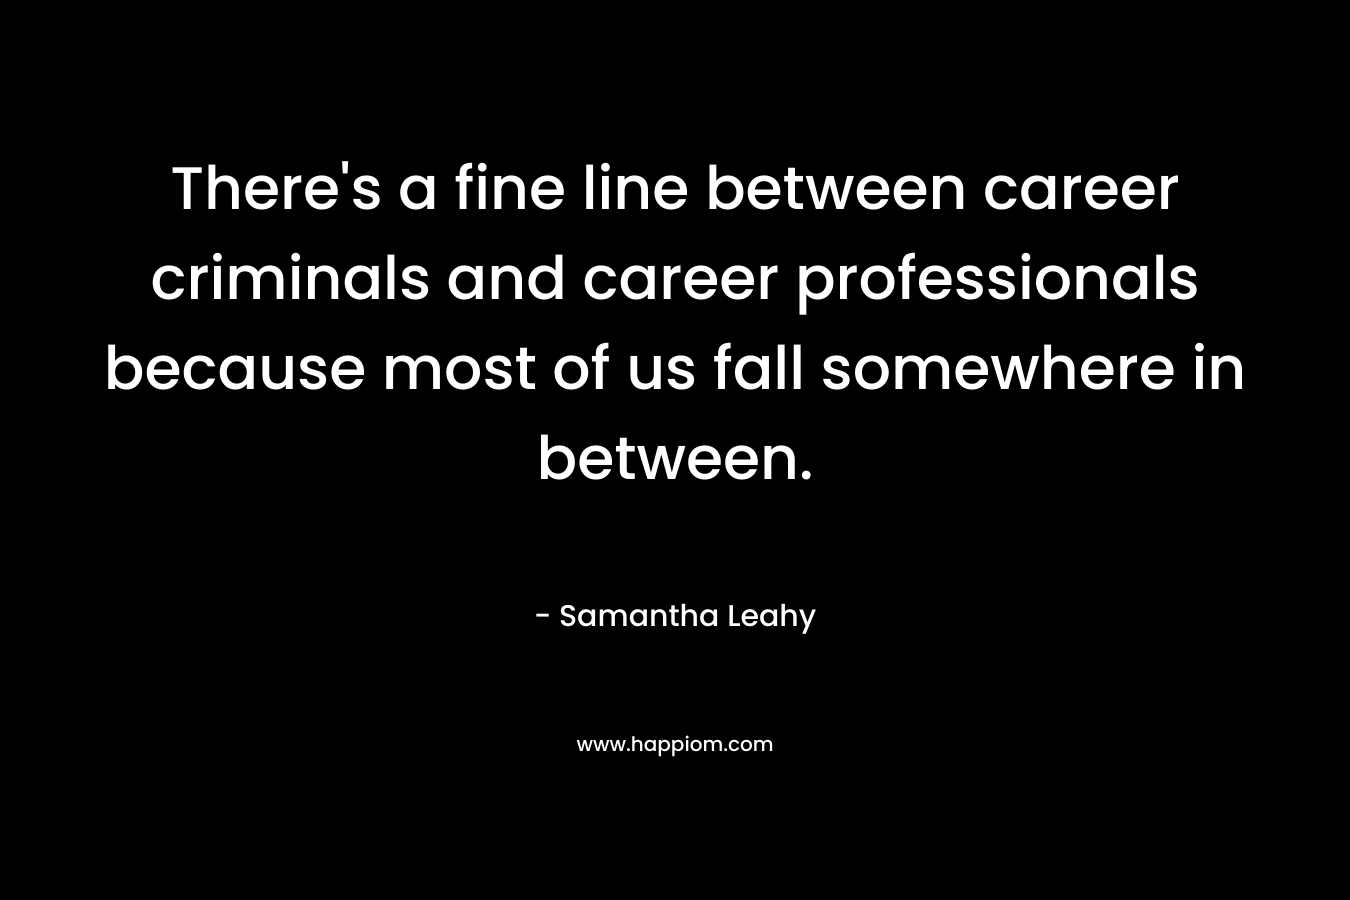 There’s a fine line between career criminals and career professionals because most of us fall somewhere in between. – Samantha Leahy